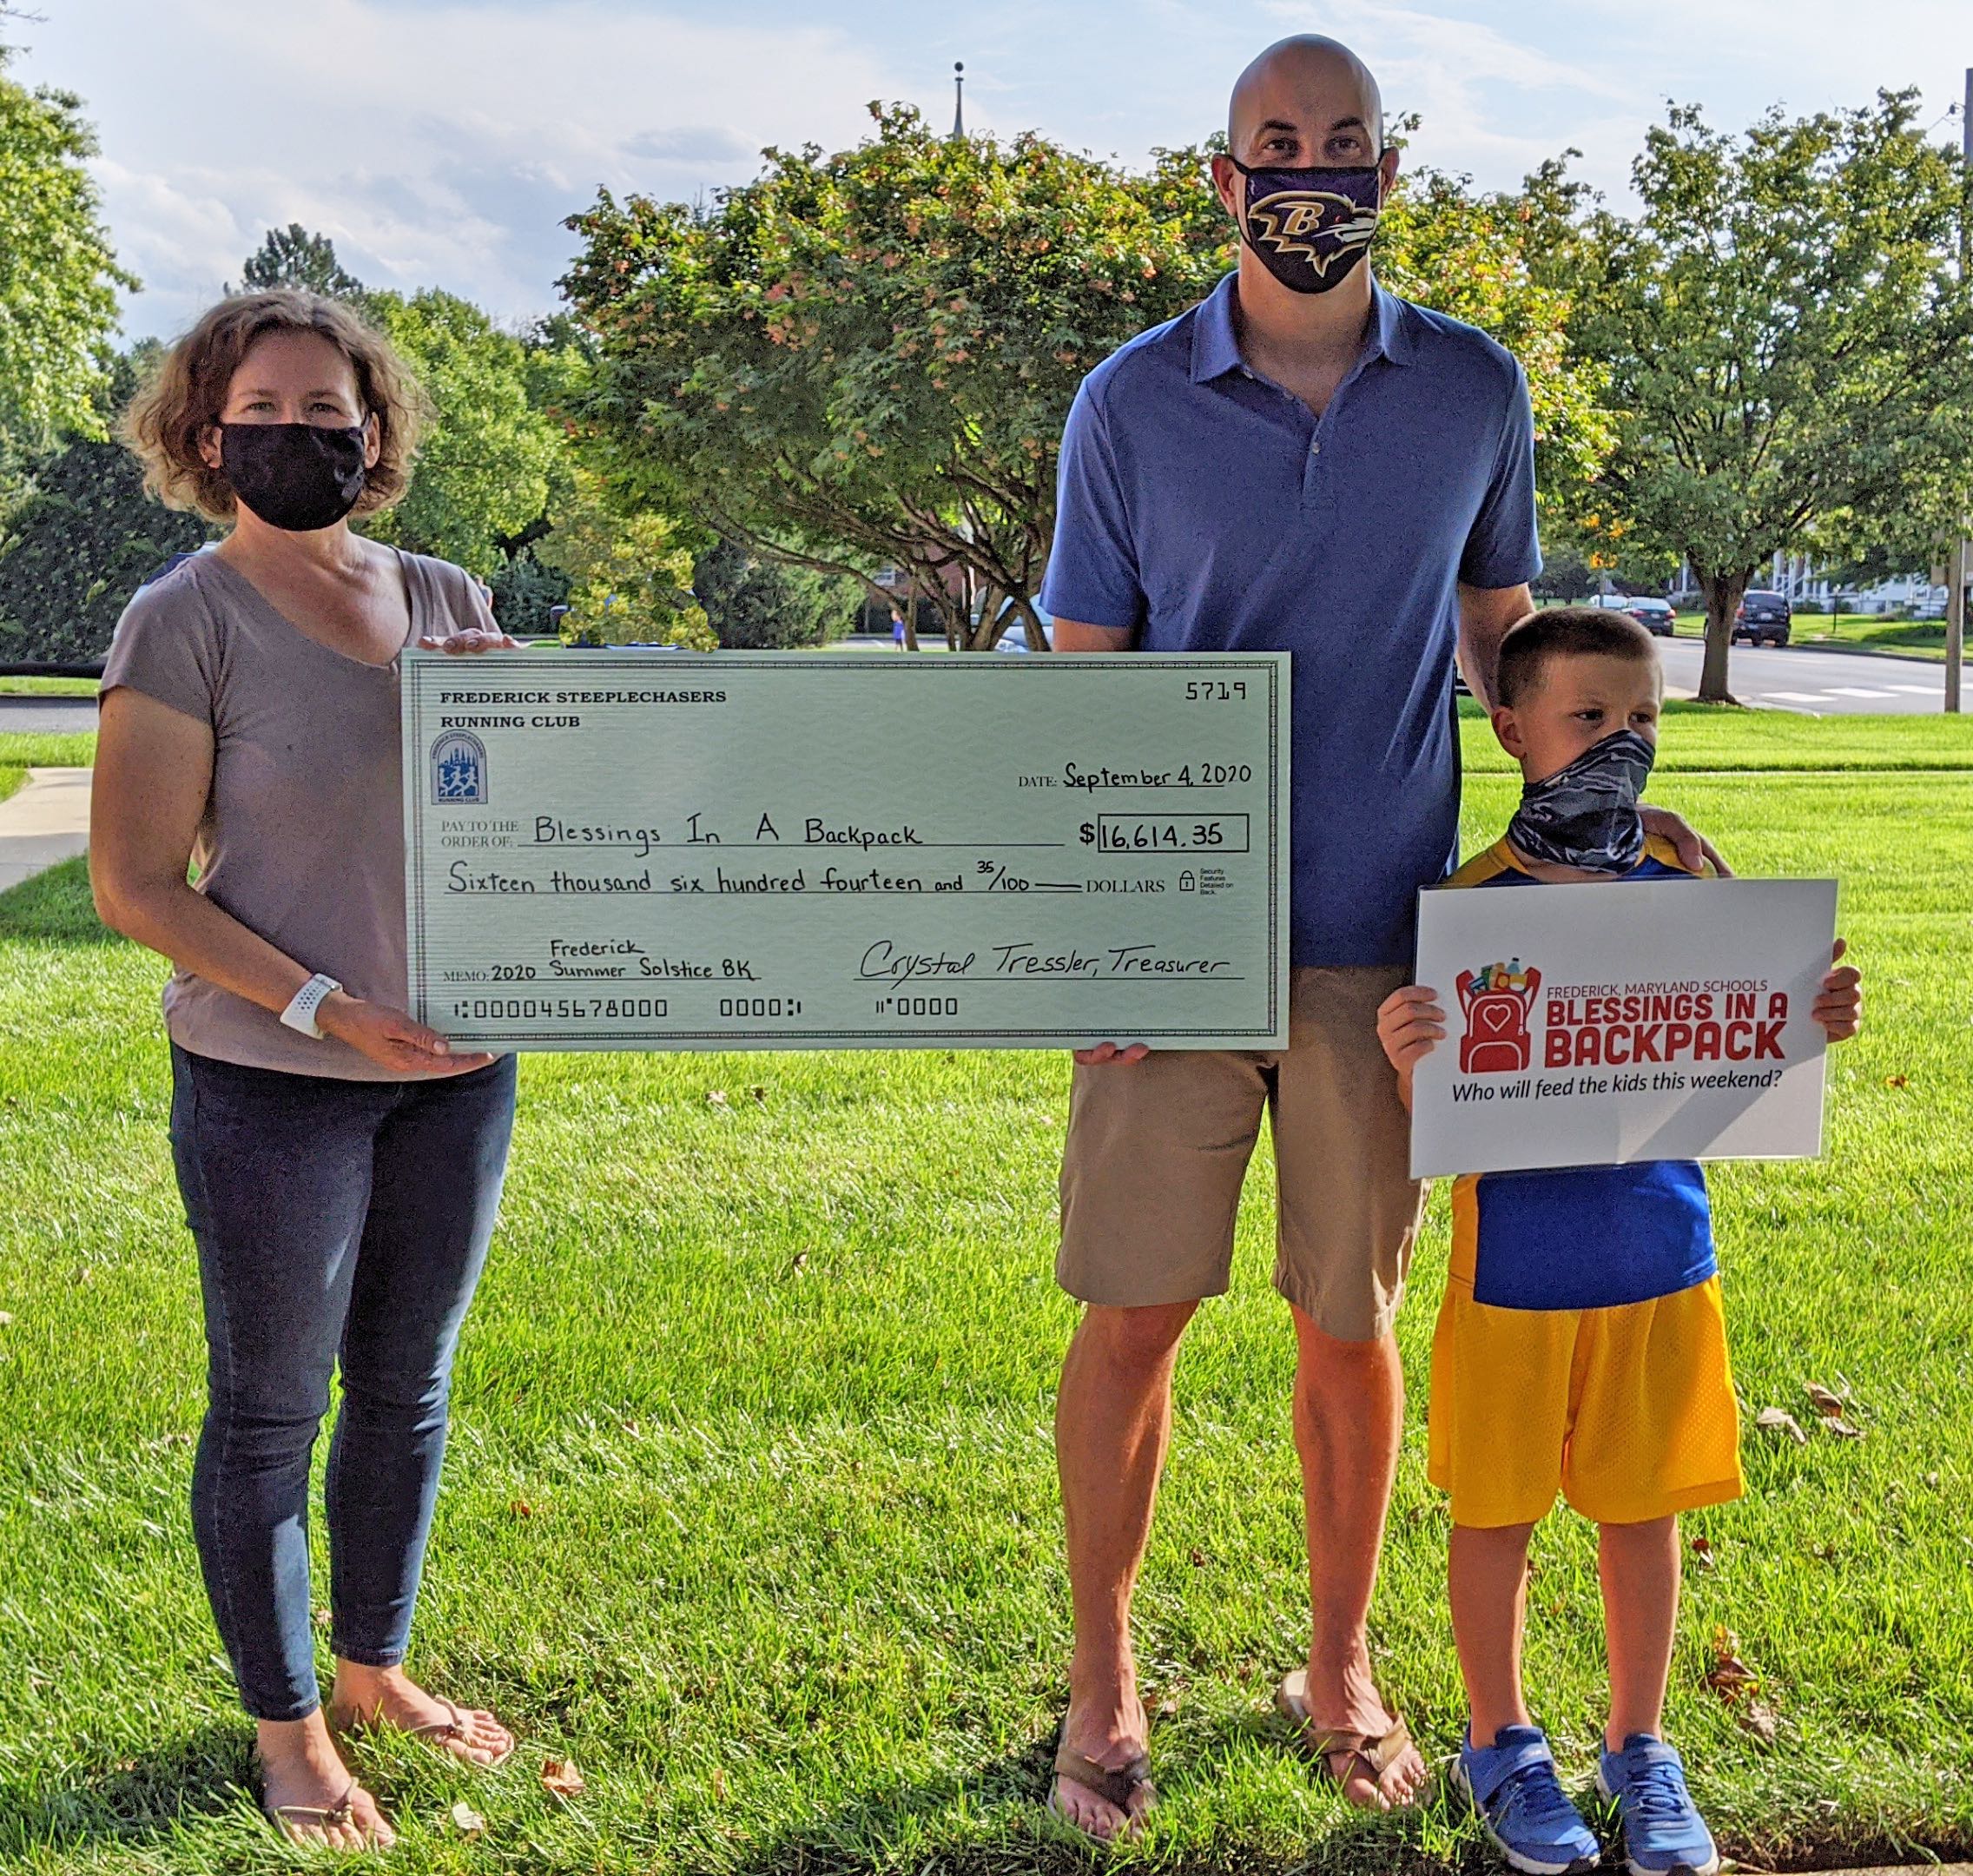 Virtual Frederick Summer Solstice 8K Raises $16,000 for Blessings in a Backpack